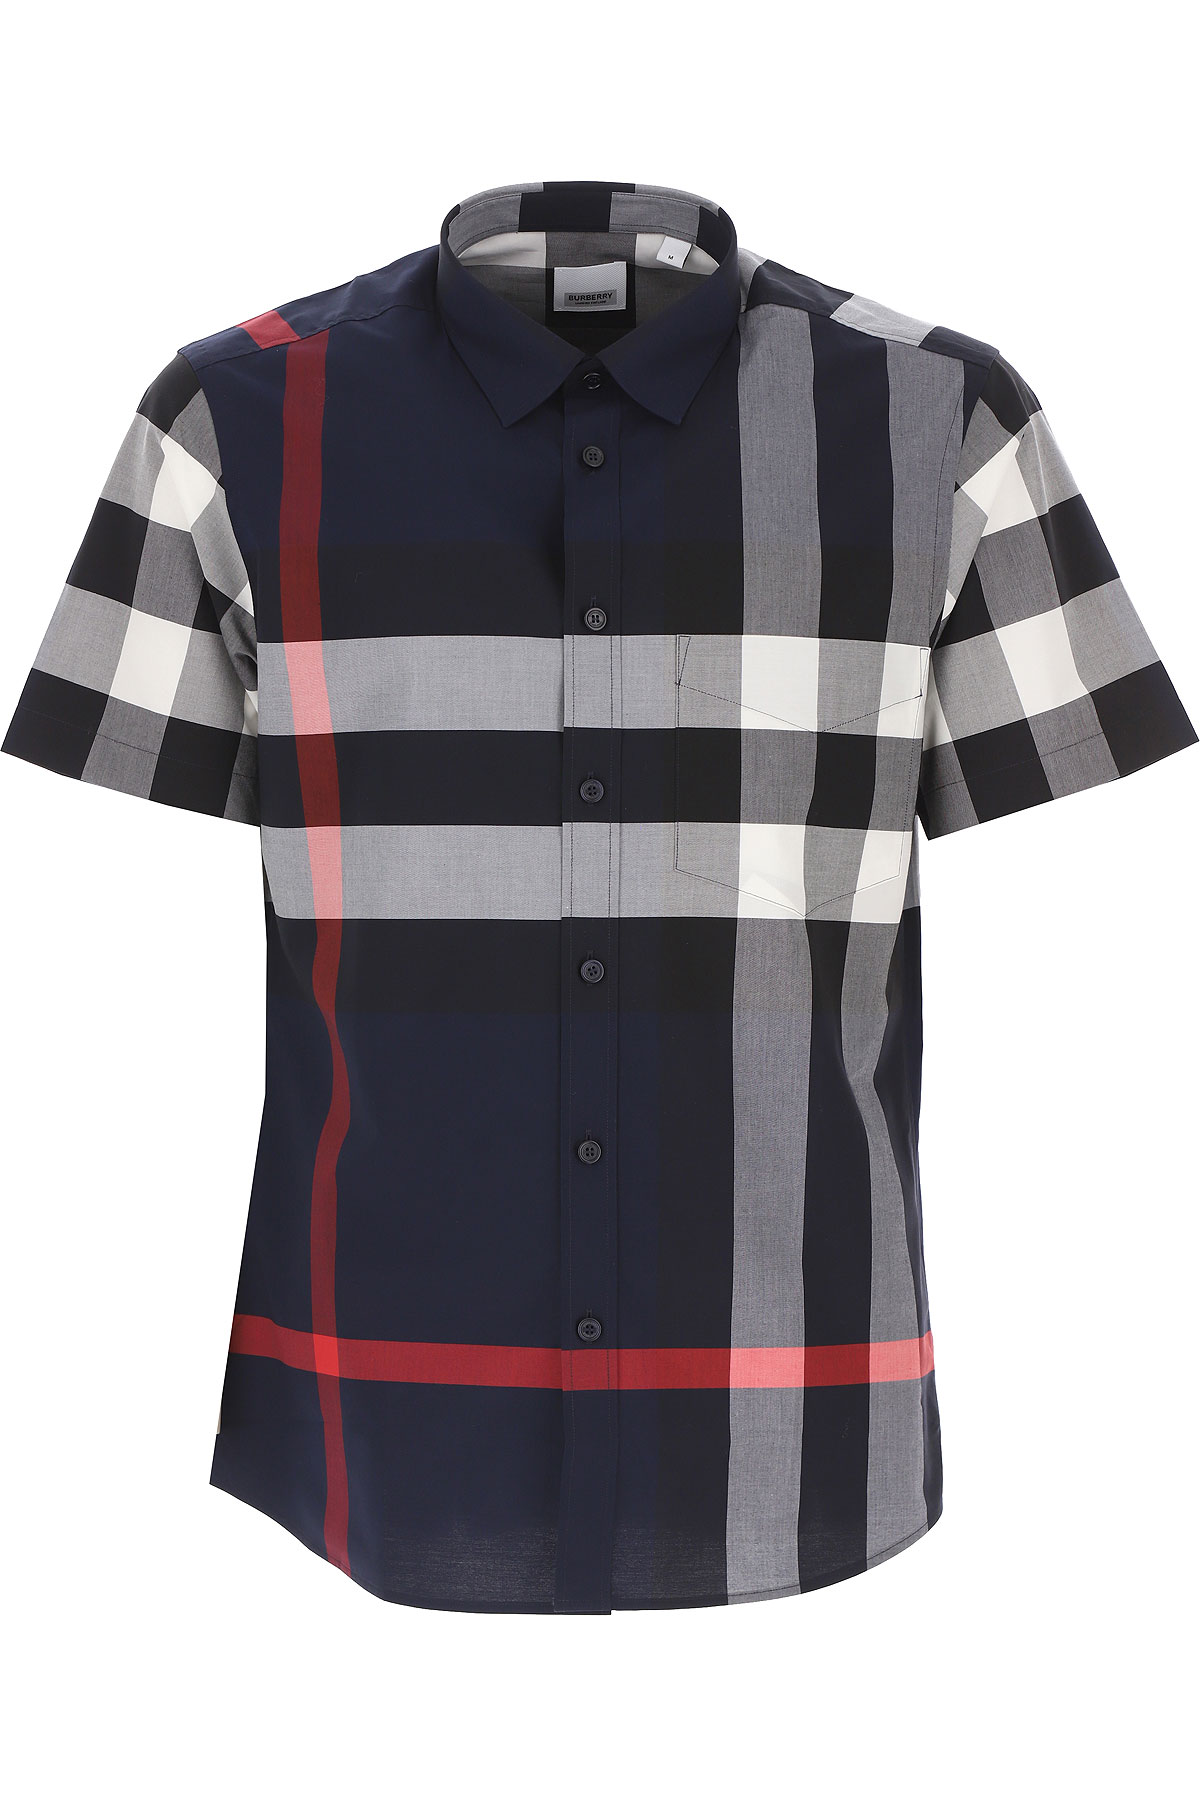 Mens Clothing Burberry, Style code: 8020855-1002-1960